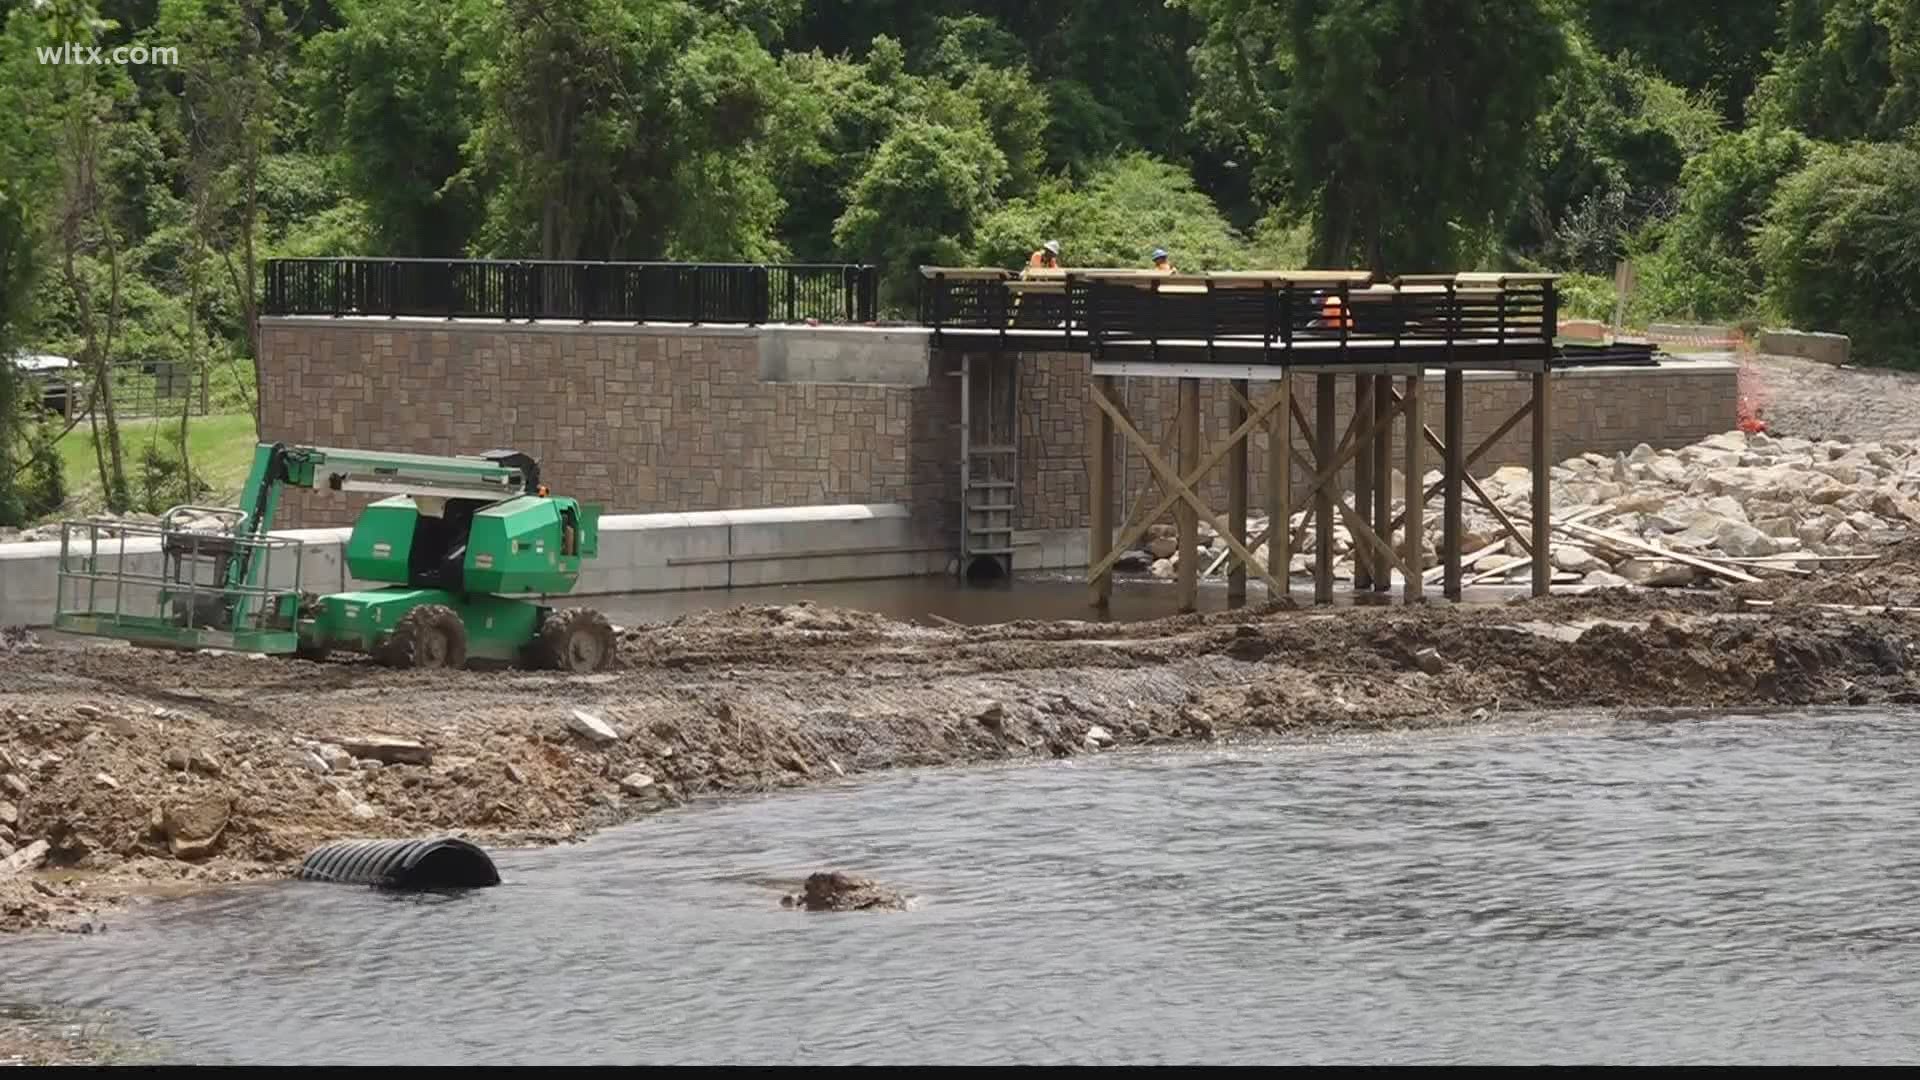 Town officials expect construction of the bridge to be completed by the end of May. They'll continue to work on rebuilding a fishing dock and picnic shelters.